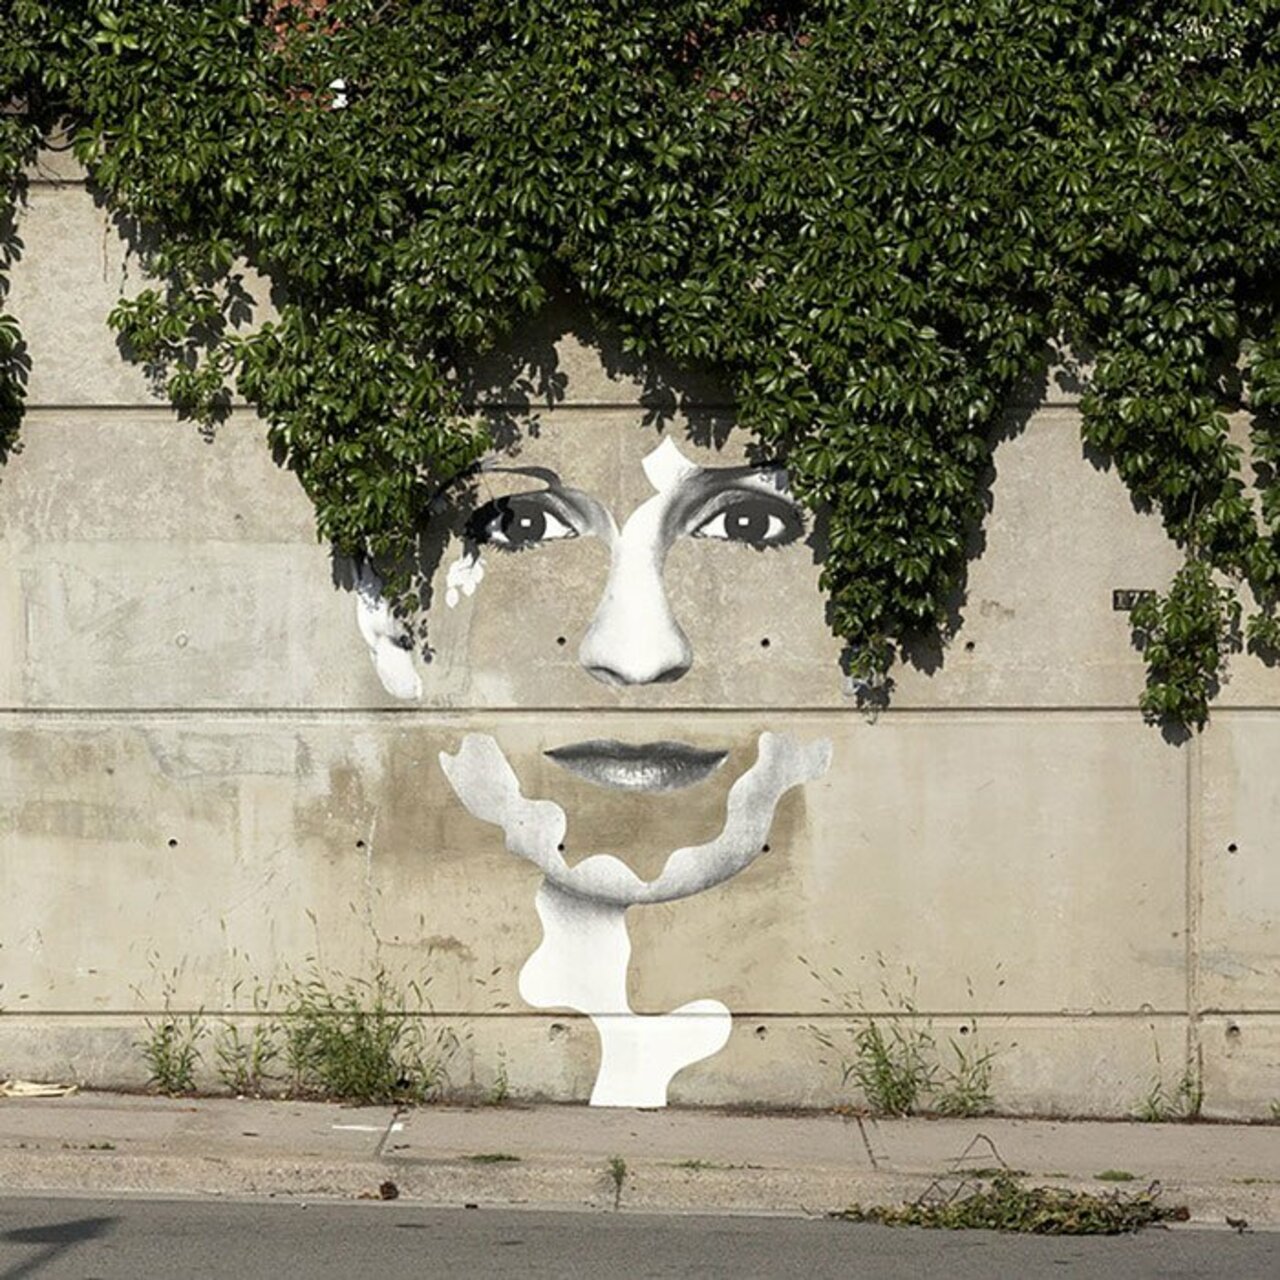 Inspirational #streetart interacting with nature. http://www.explosion.com/63240/29-pictures-of-street-art-interactions-with-the-nature-amazing/ https://t.co/2IxtWRSjb0